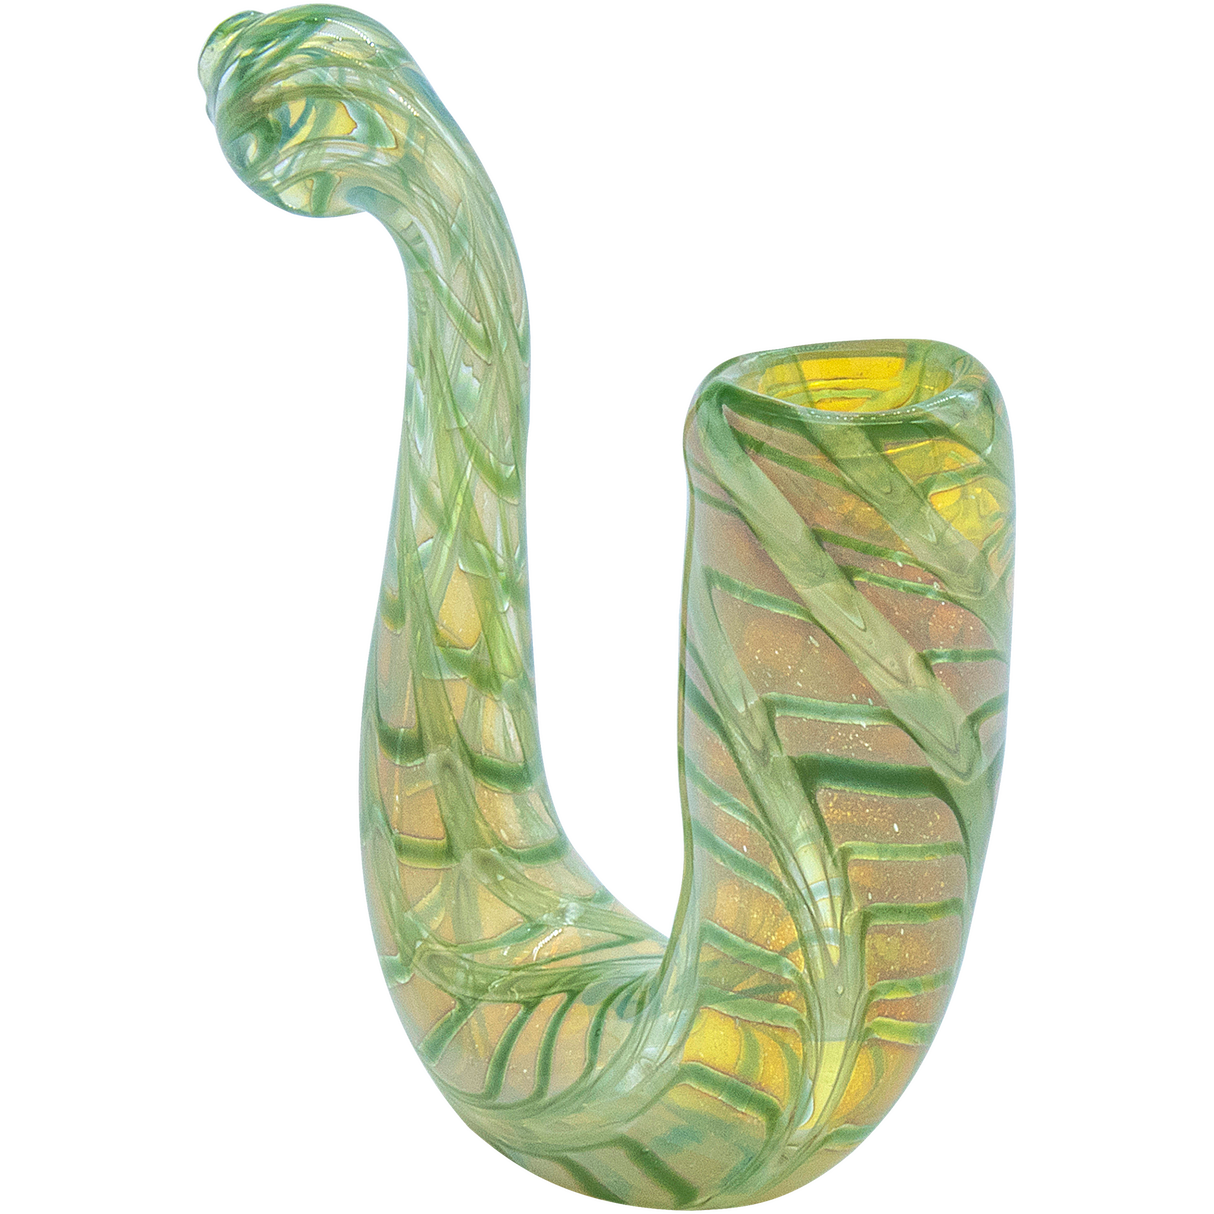 LA Pipes Pocket Sherlock Pipe in Green, Fumed Color Changing Glass, 3.75" Tall - Front View